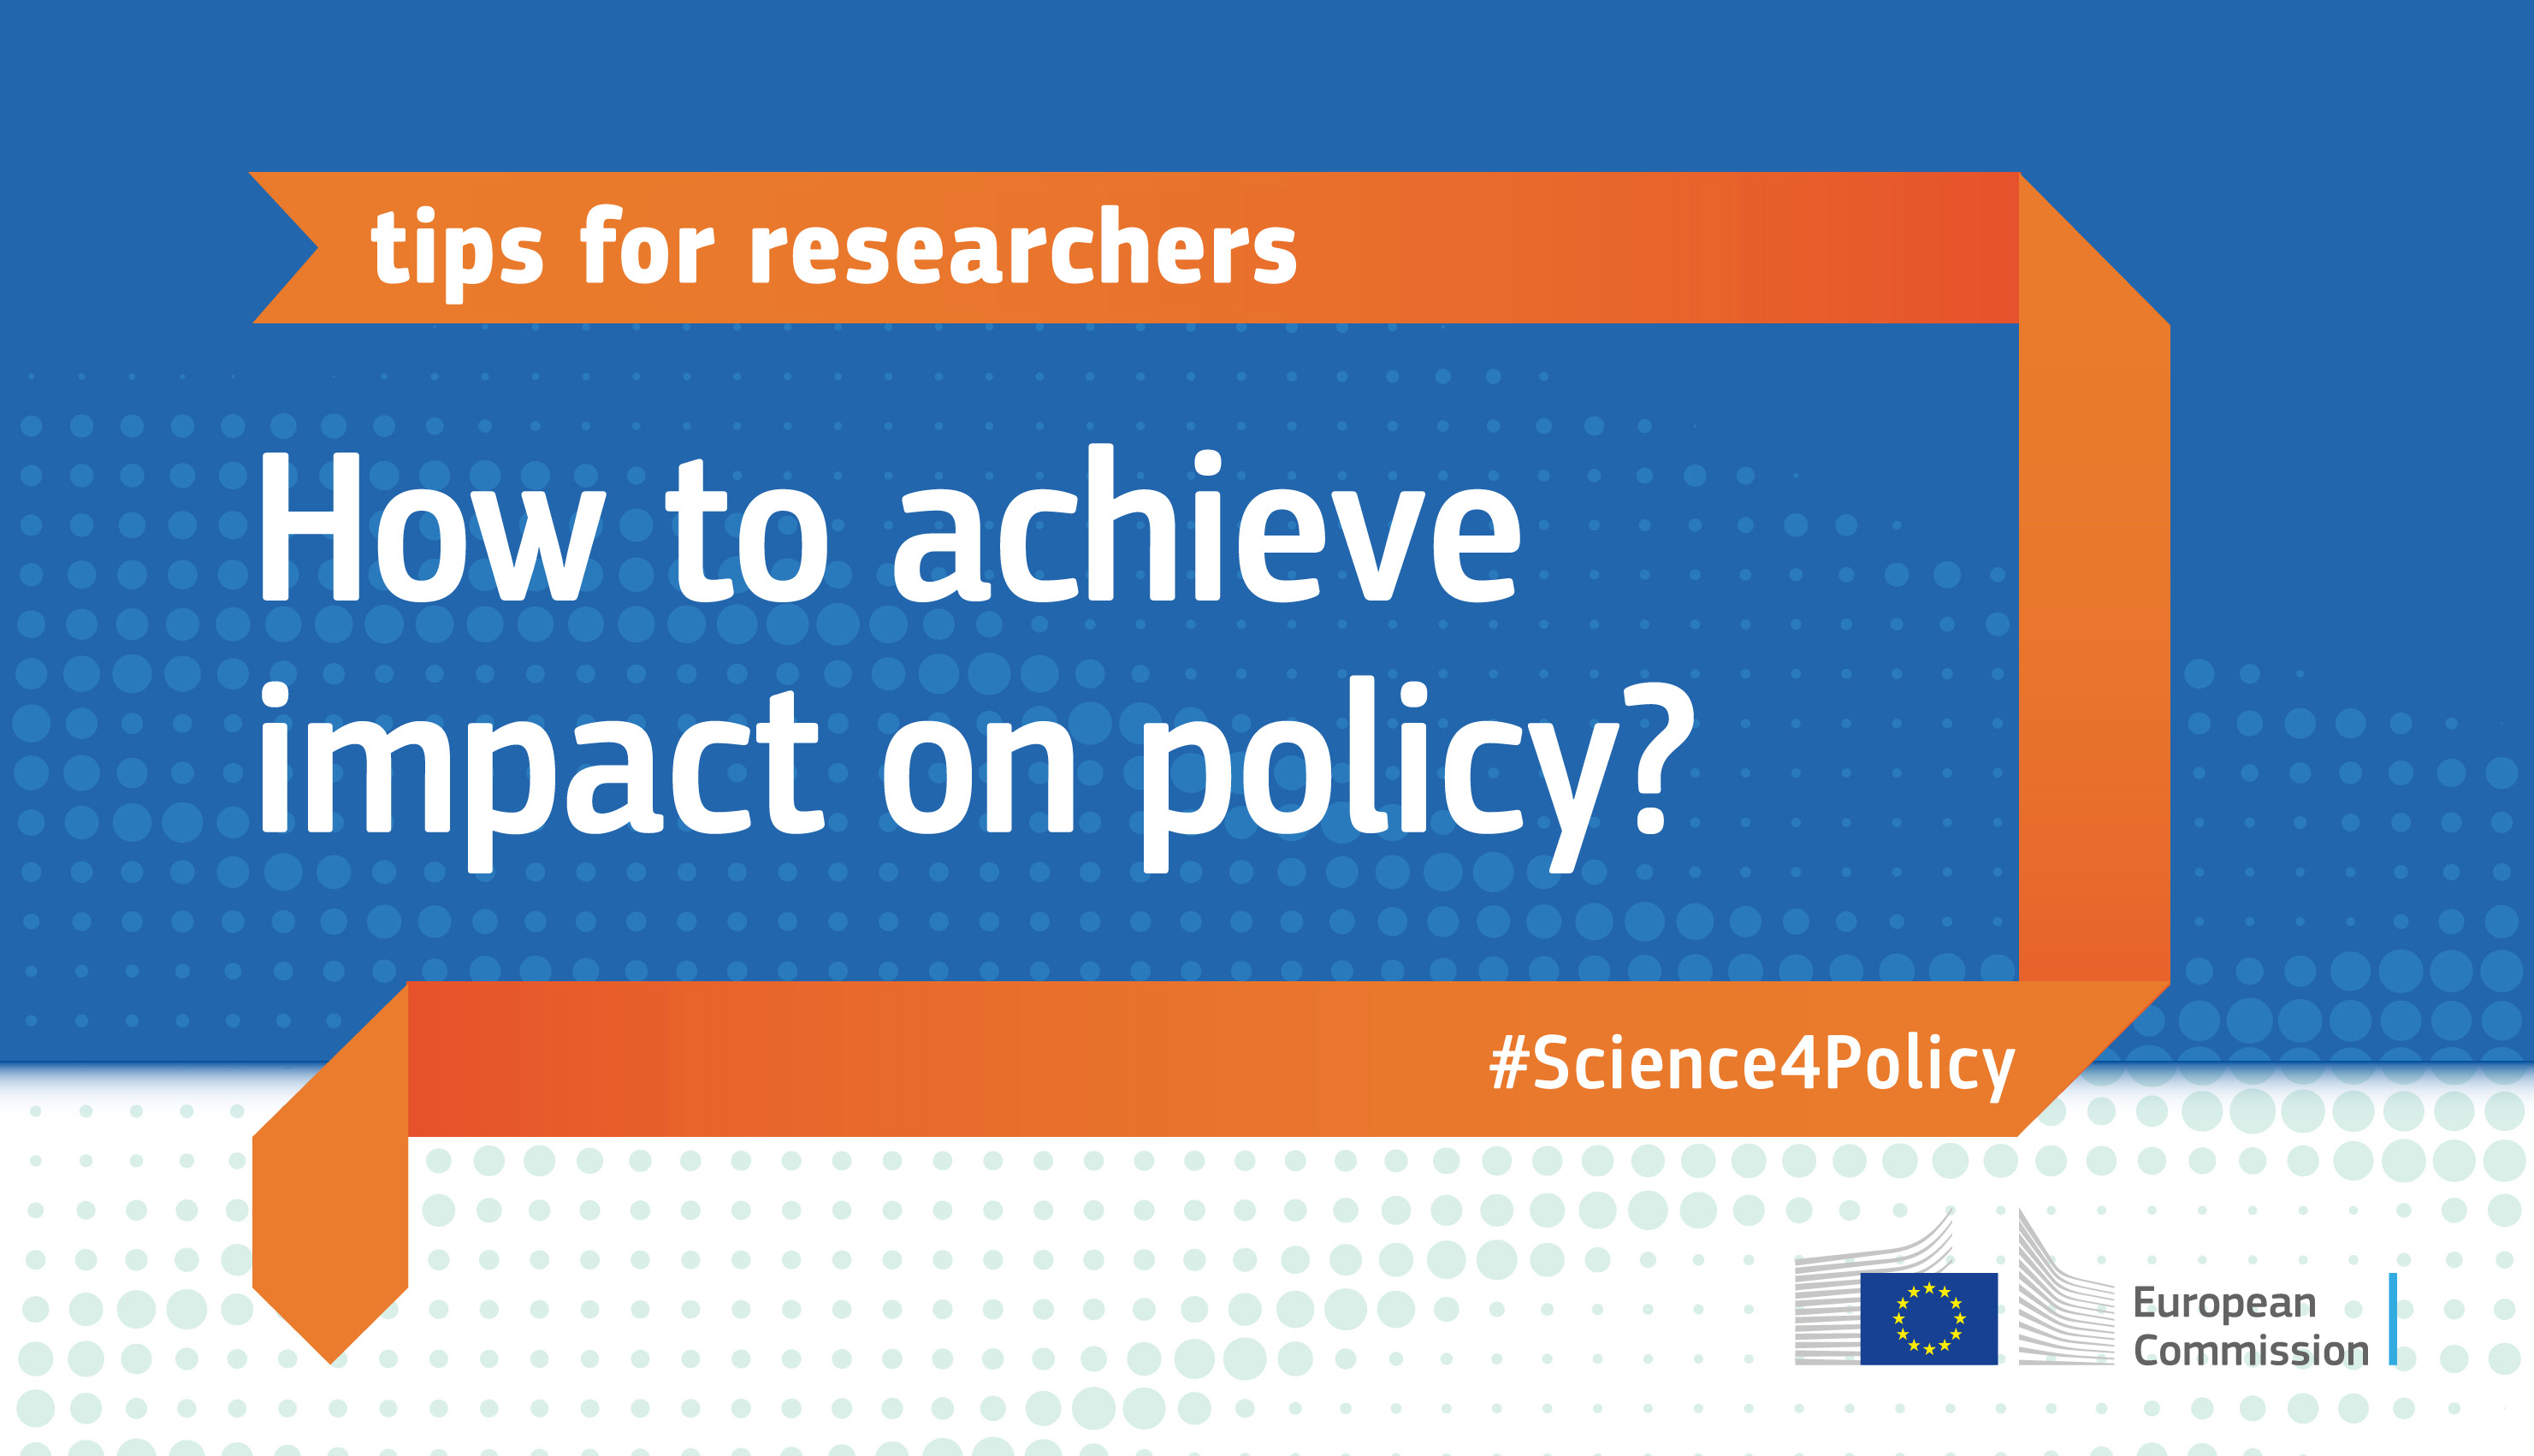 We are opening the 2nd round of our Training-of-Trainers (ToT) programme for researchers and facilitators from EU countries. Participants completing our ToT will help researchers in EU countries to have impact on policy.